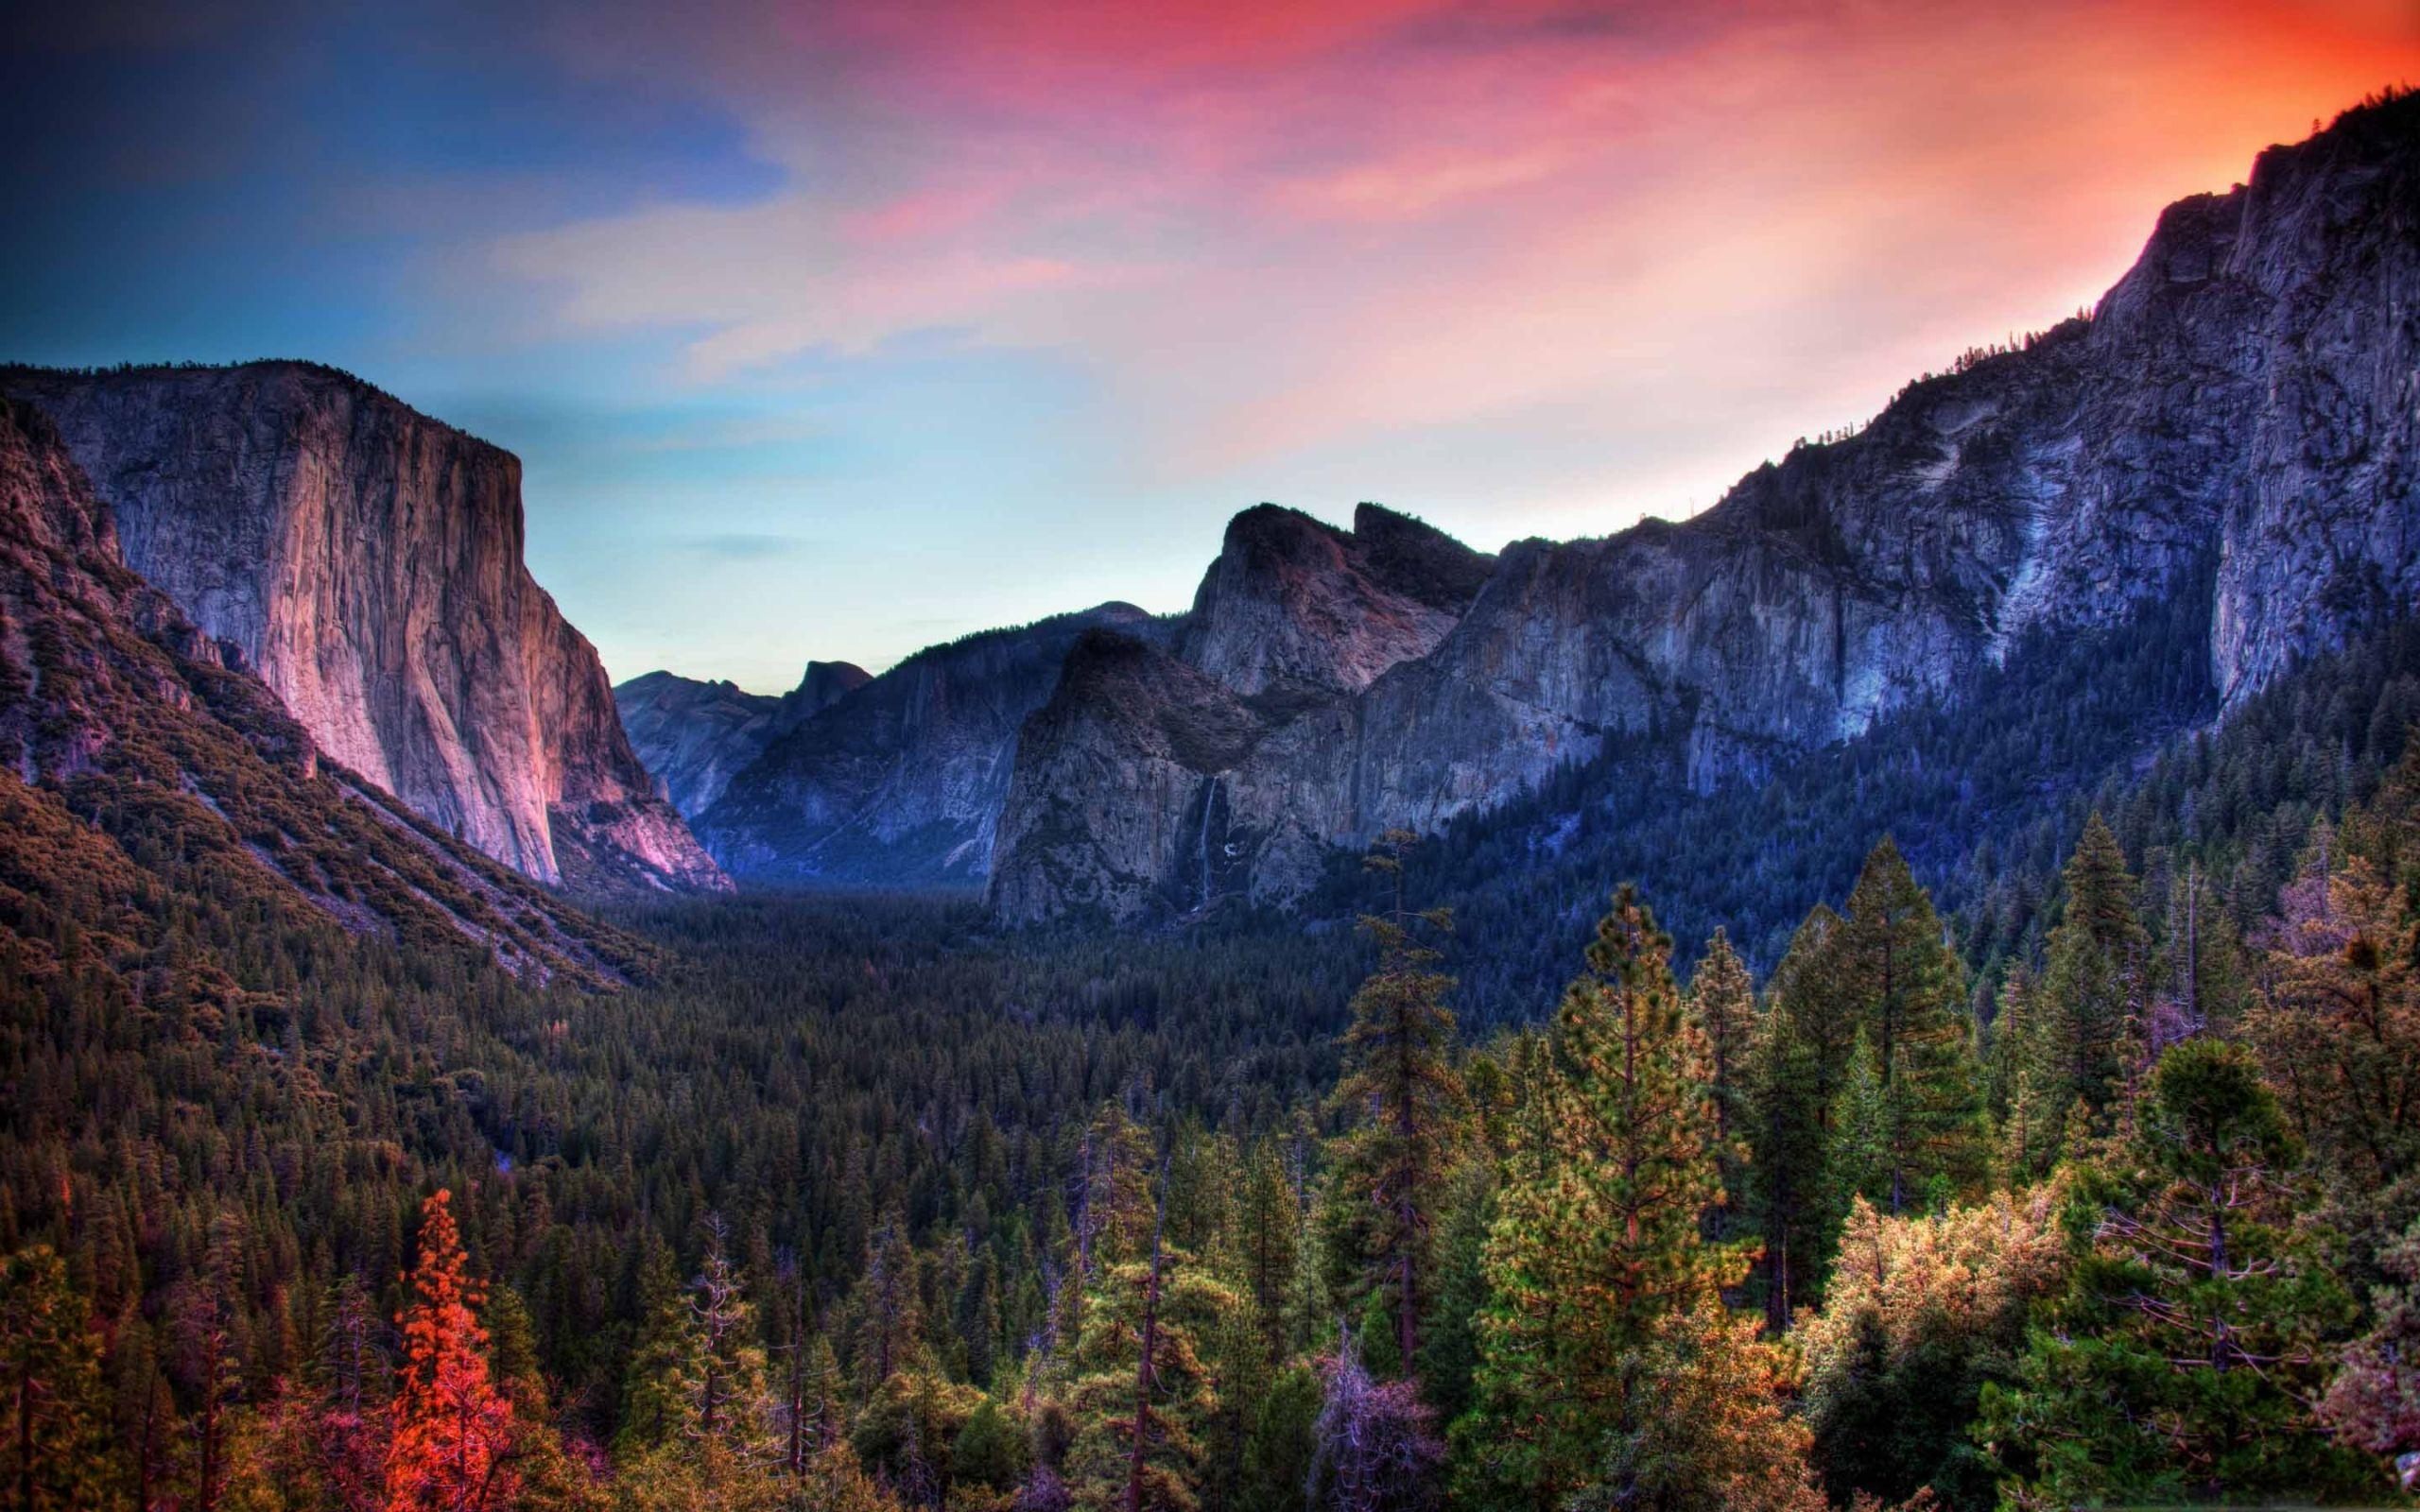 download homebrew for yosemite os x 10.10